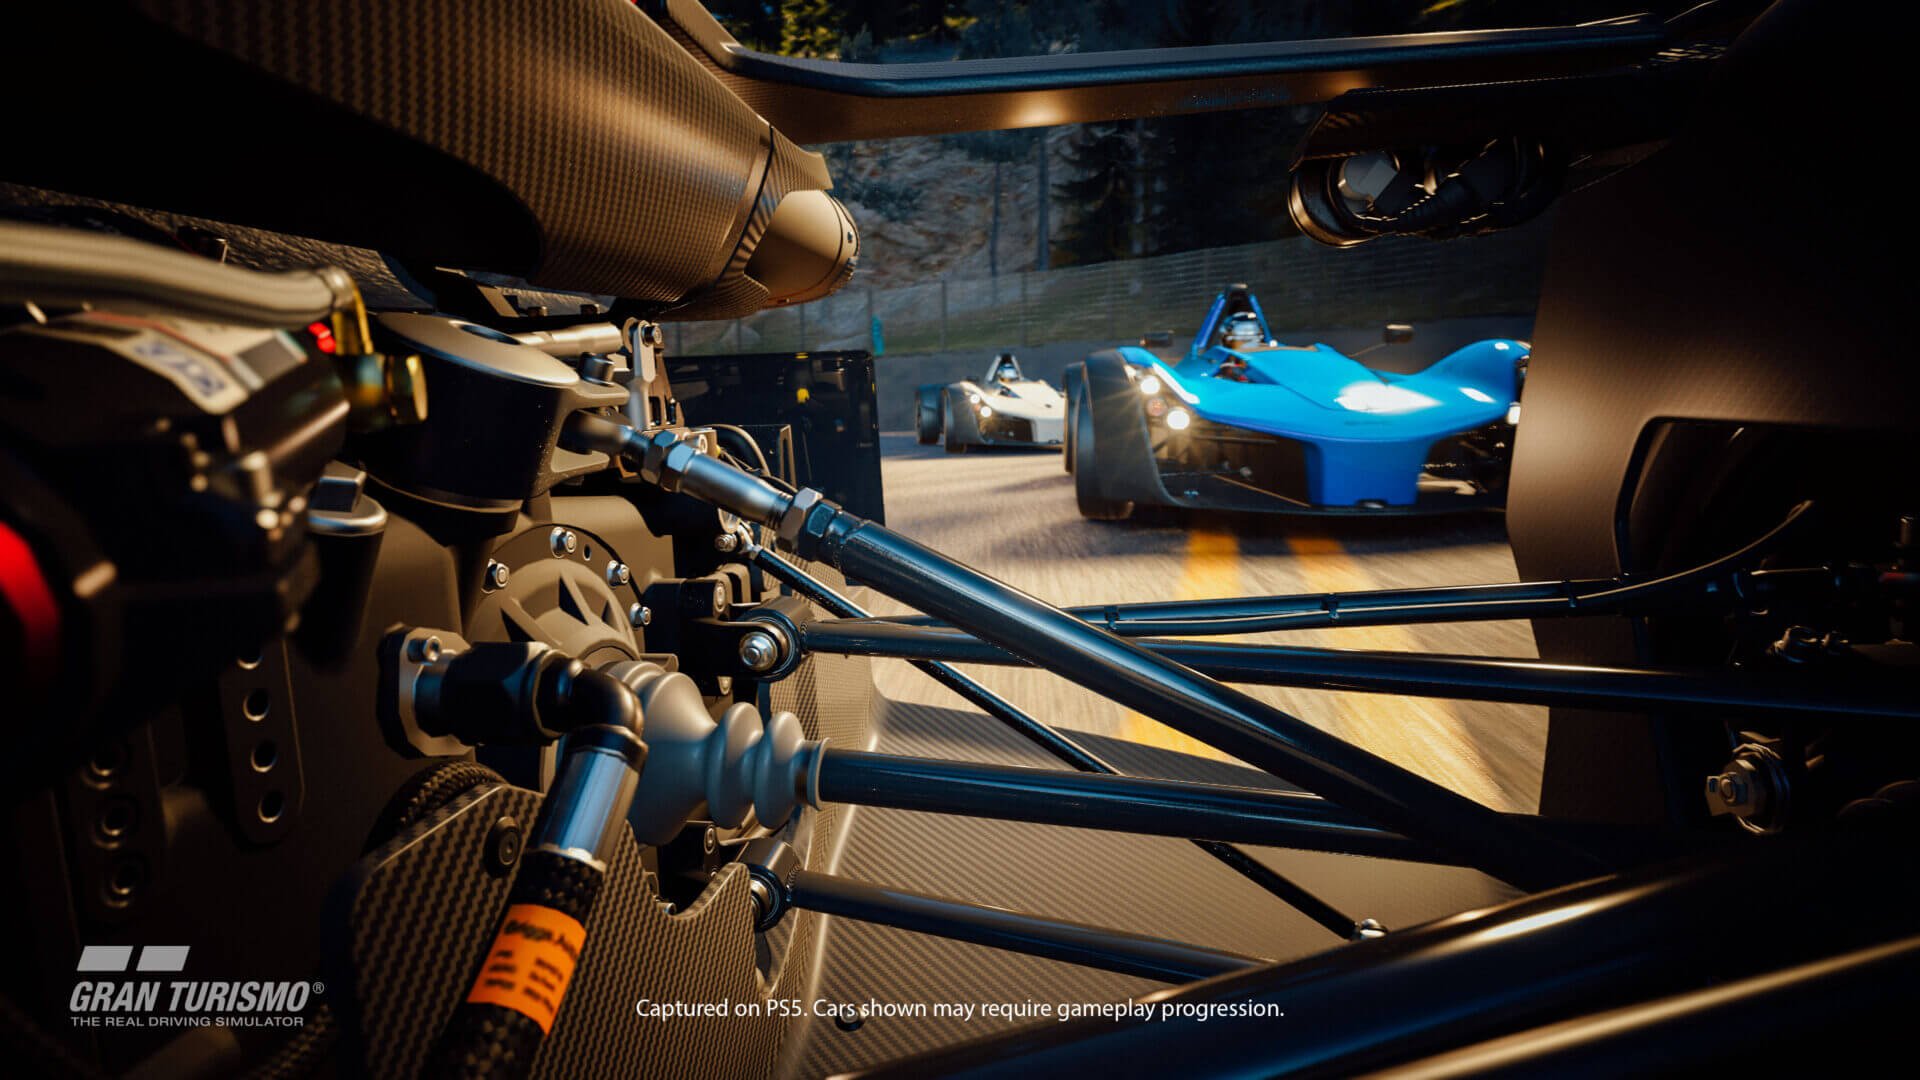 Gran Turismo 7 tech analysis: how Polyphony uses the power of PS5